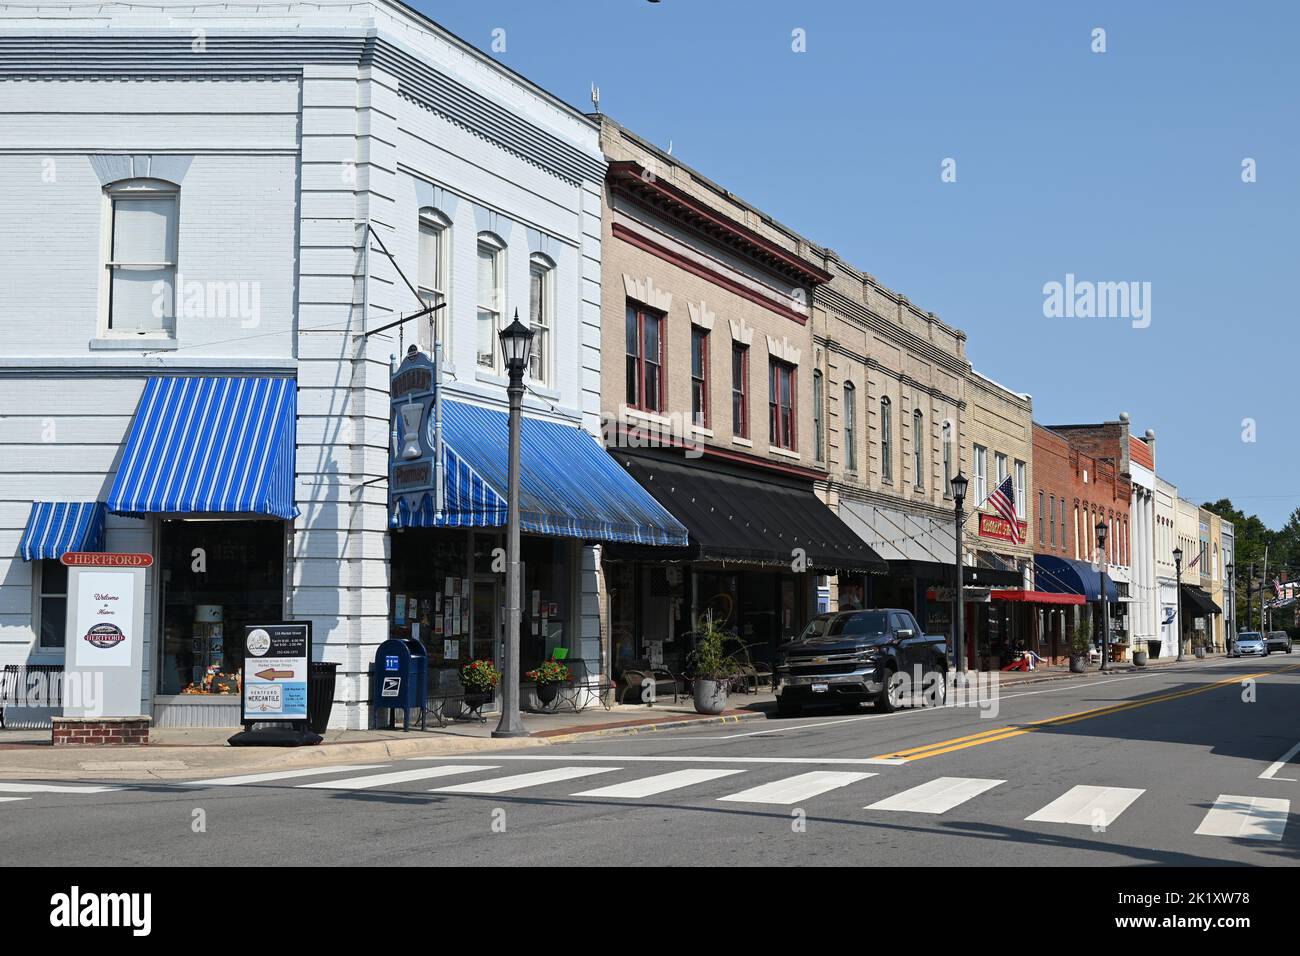 Historic storefronts along the main business district in the small town of Hertford, North Carolina. Stock Photo